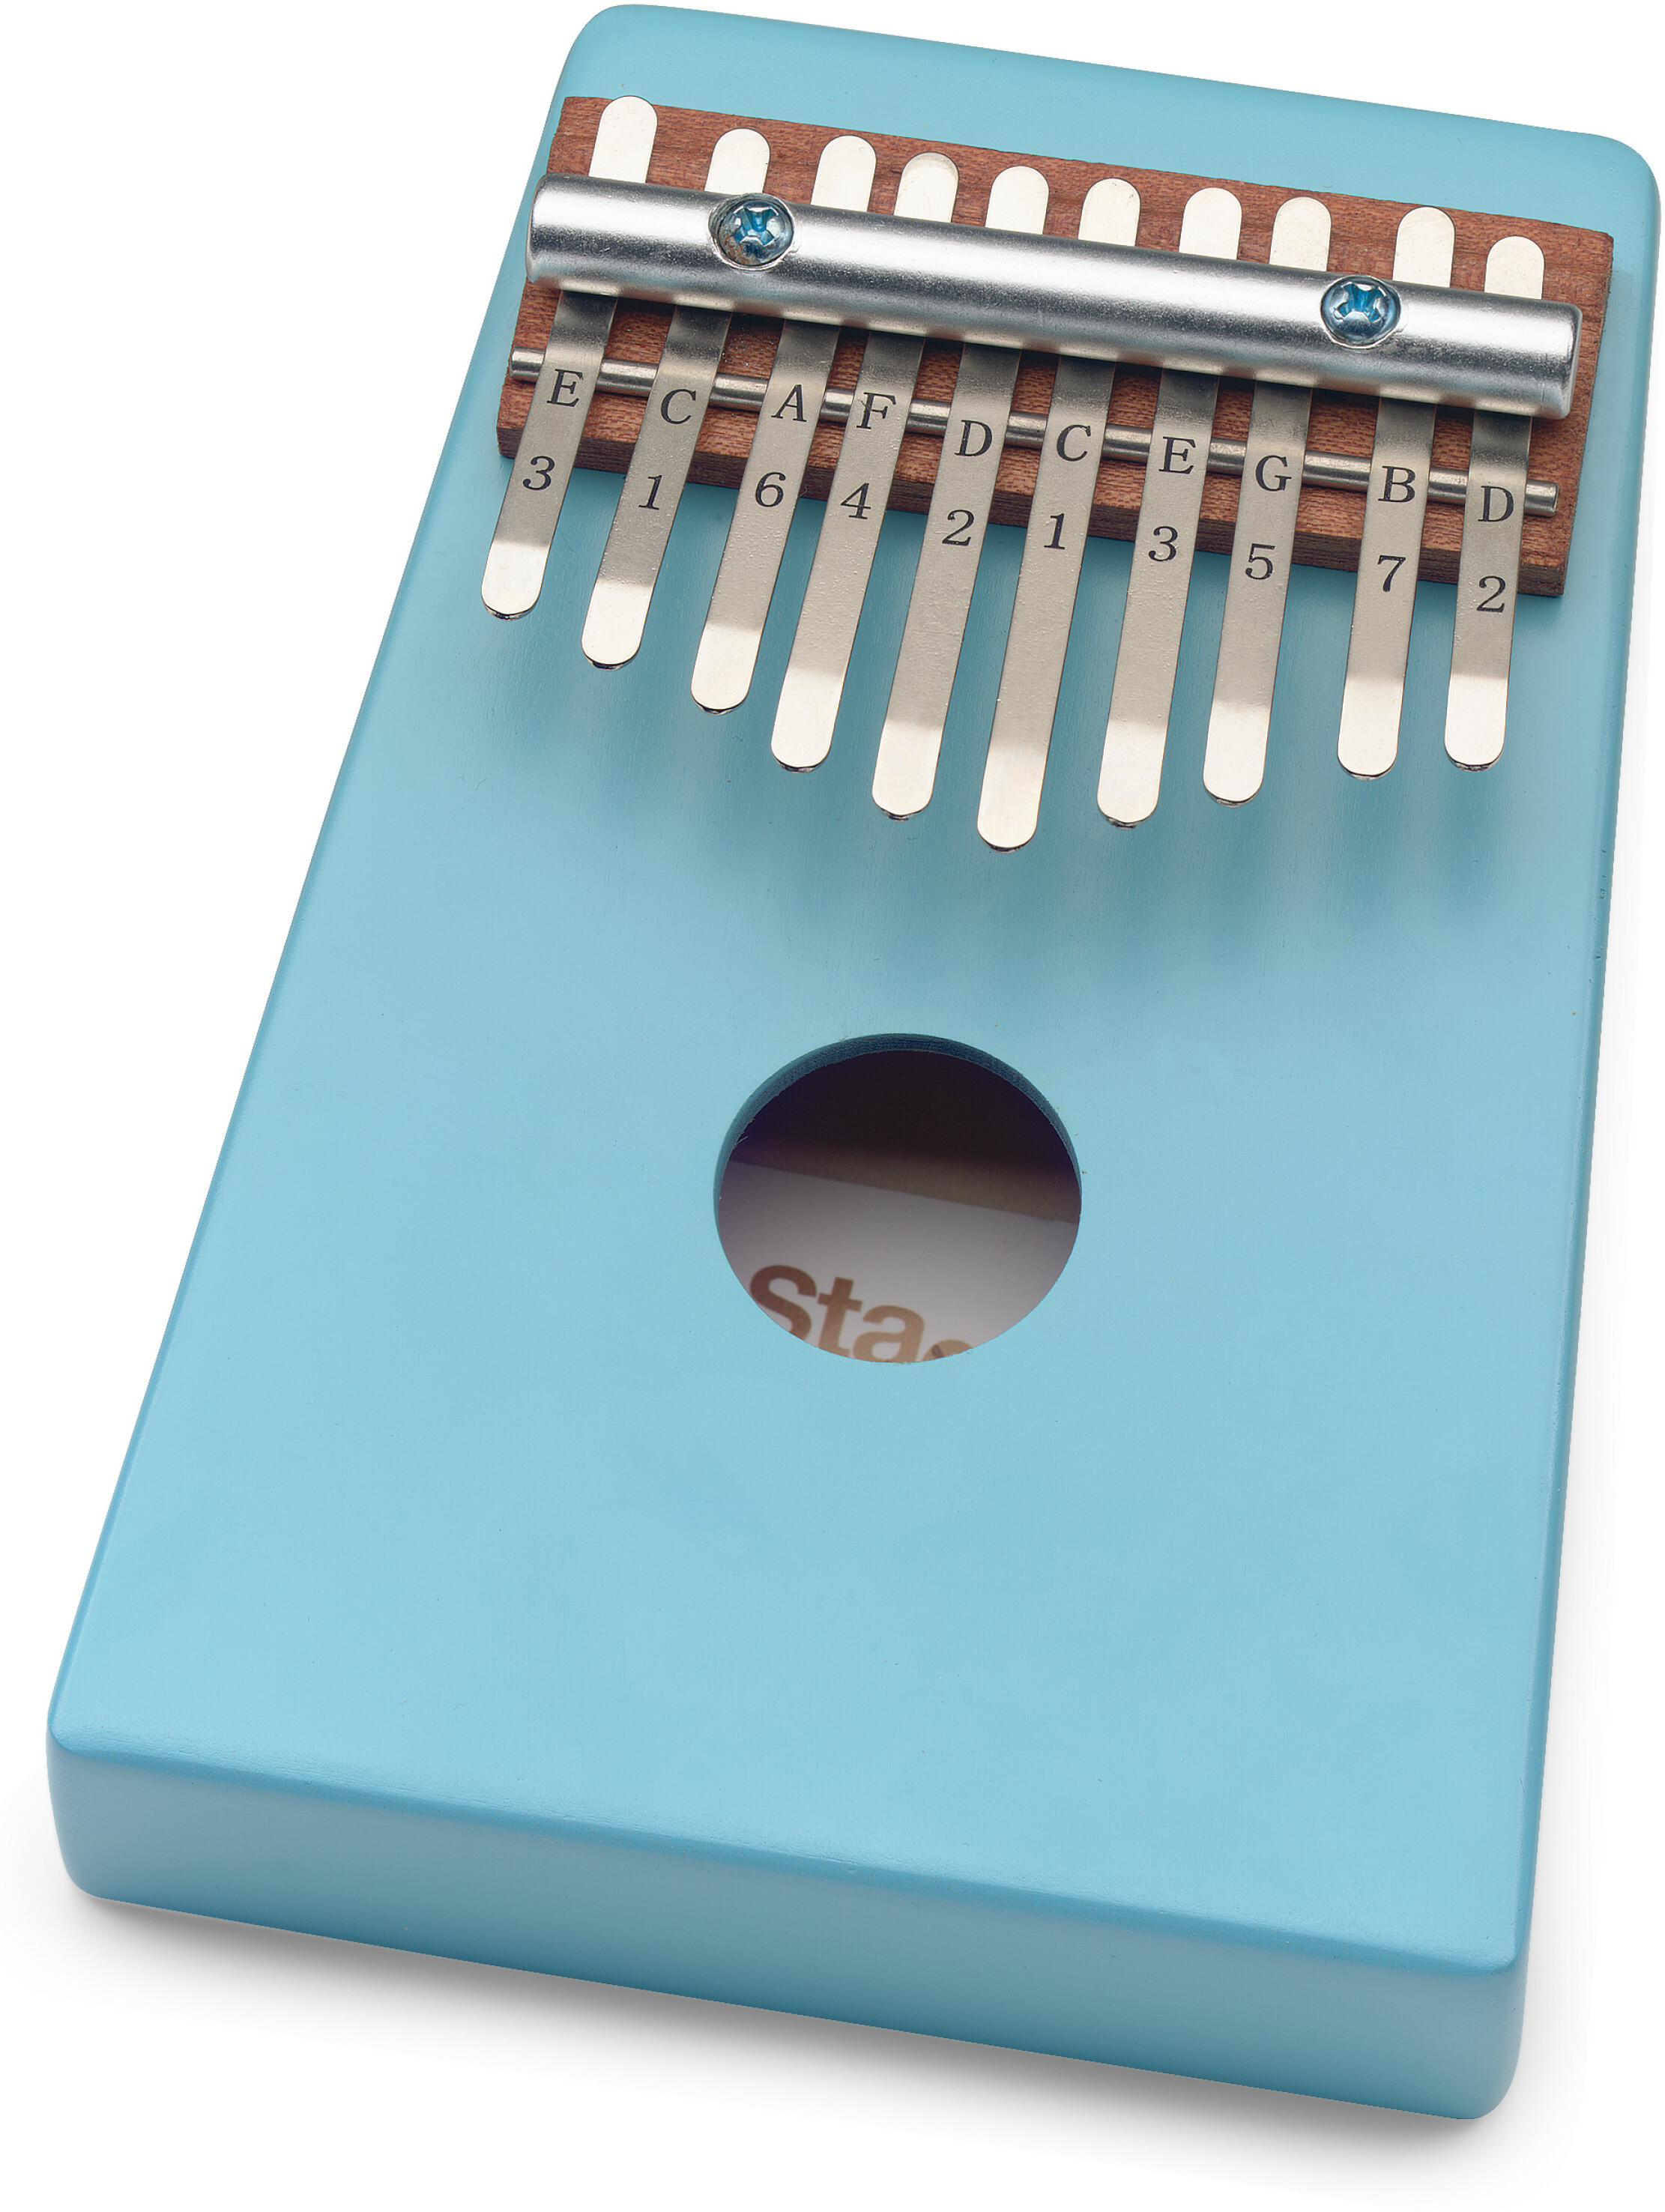 Stagg Kalimba Enfant 10 Notes Bleu - Hit percussion - Main picture